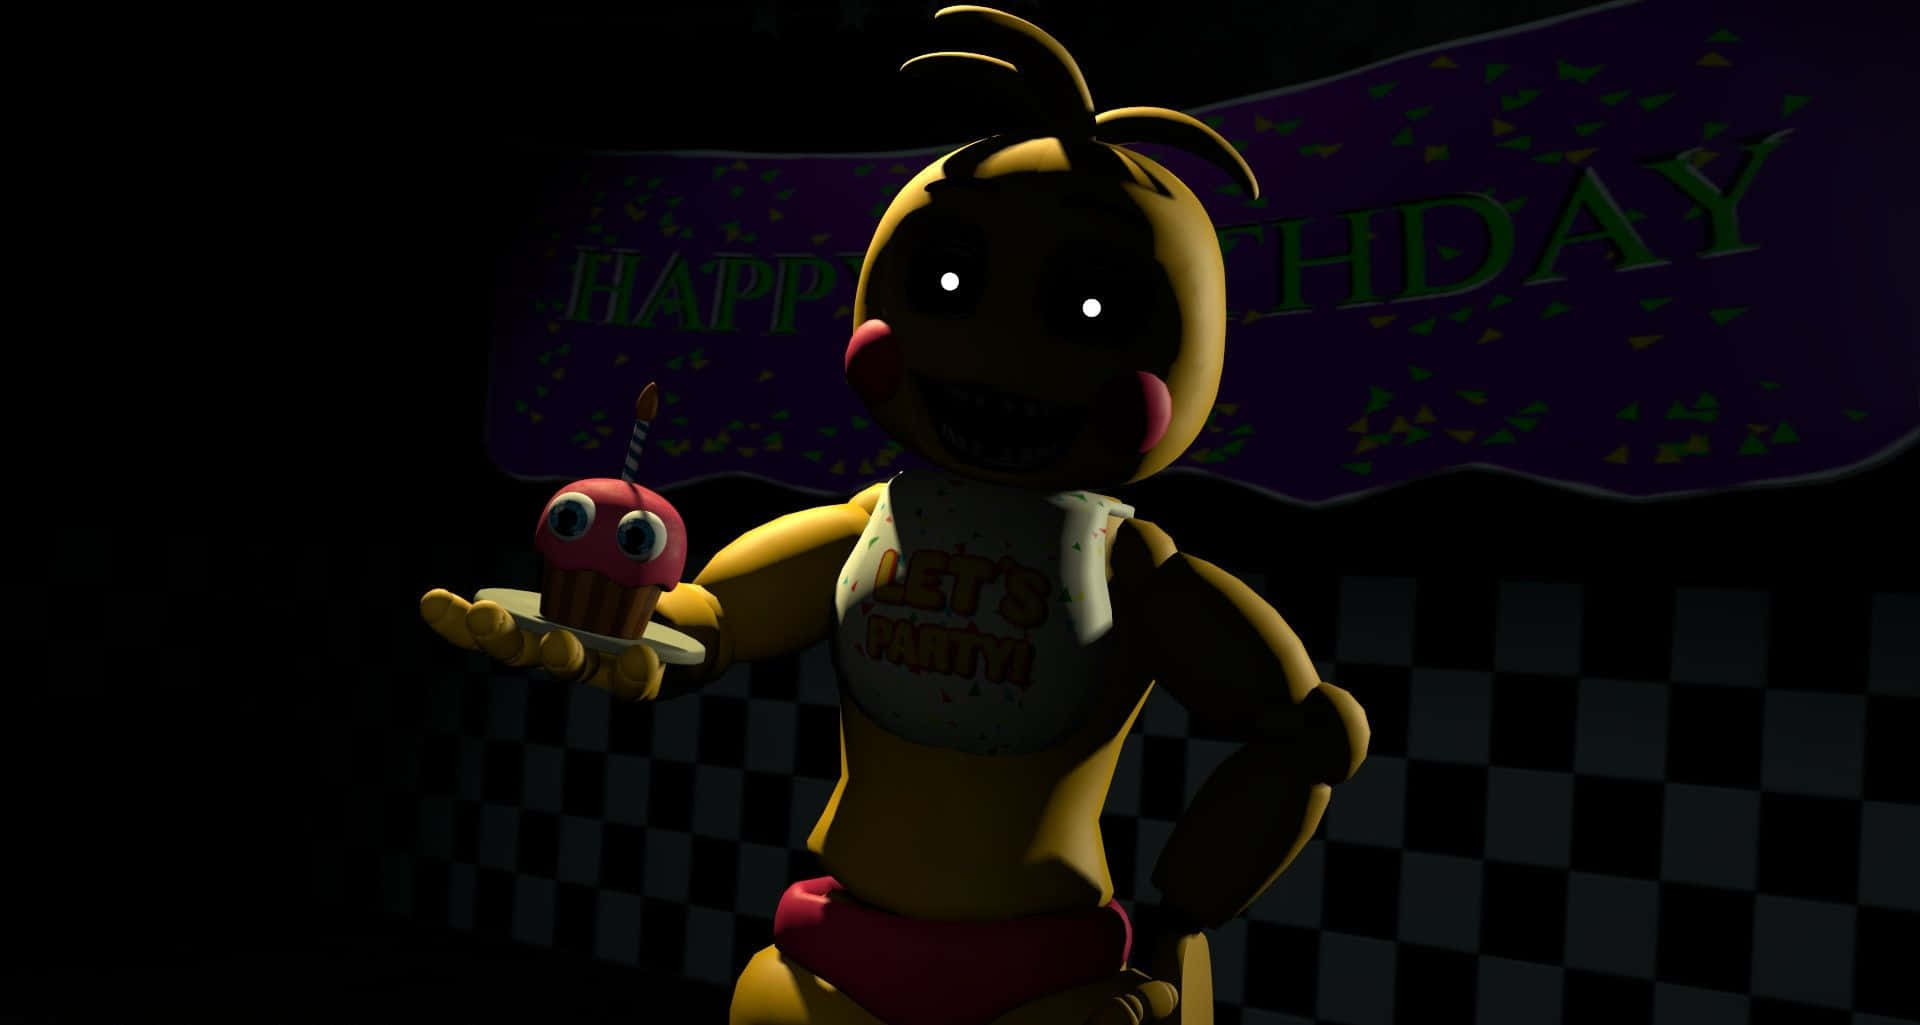 Vibrant Chica The Chicken from Five Nights at Freddy's Wallpaper